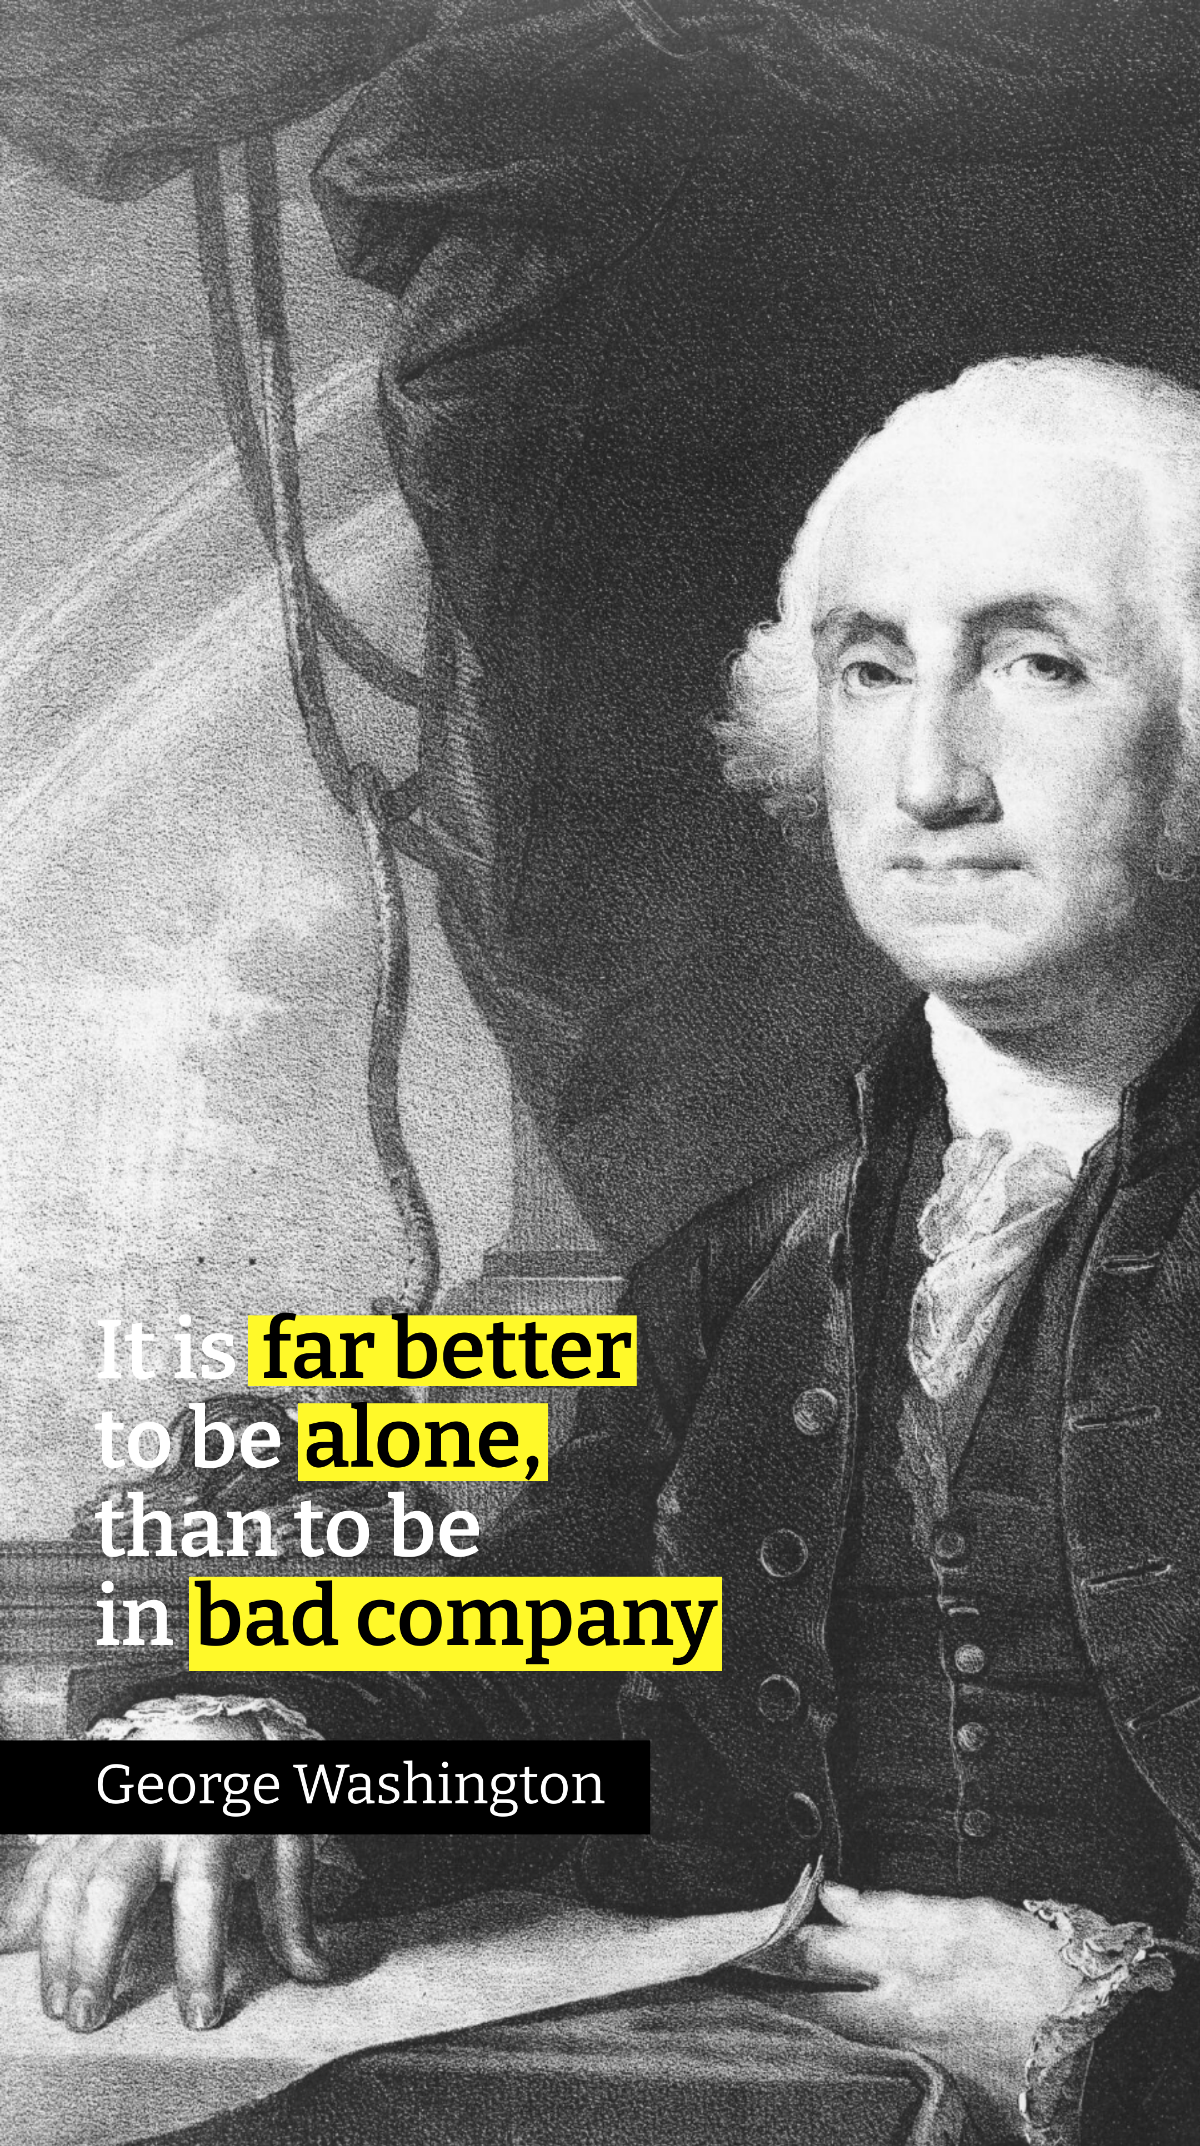 George Washington - It is far better to be alone, than to be in bad company